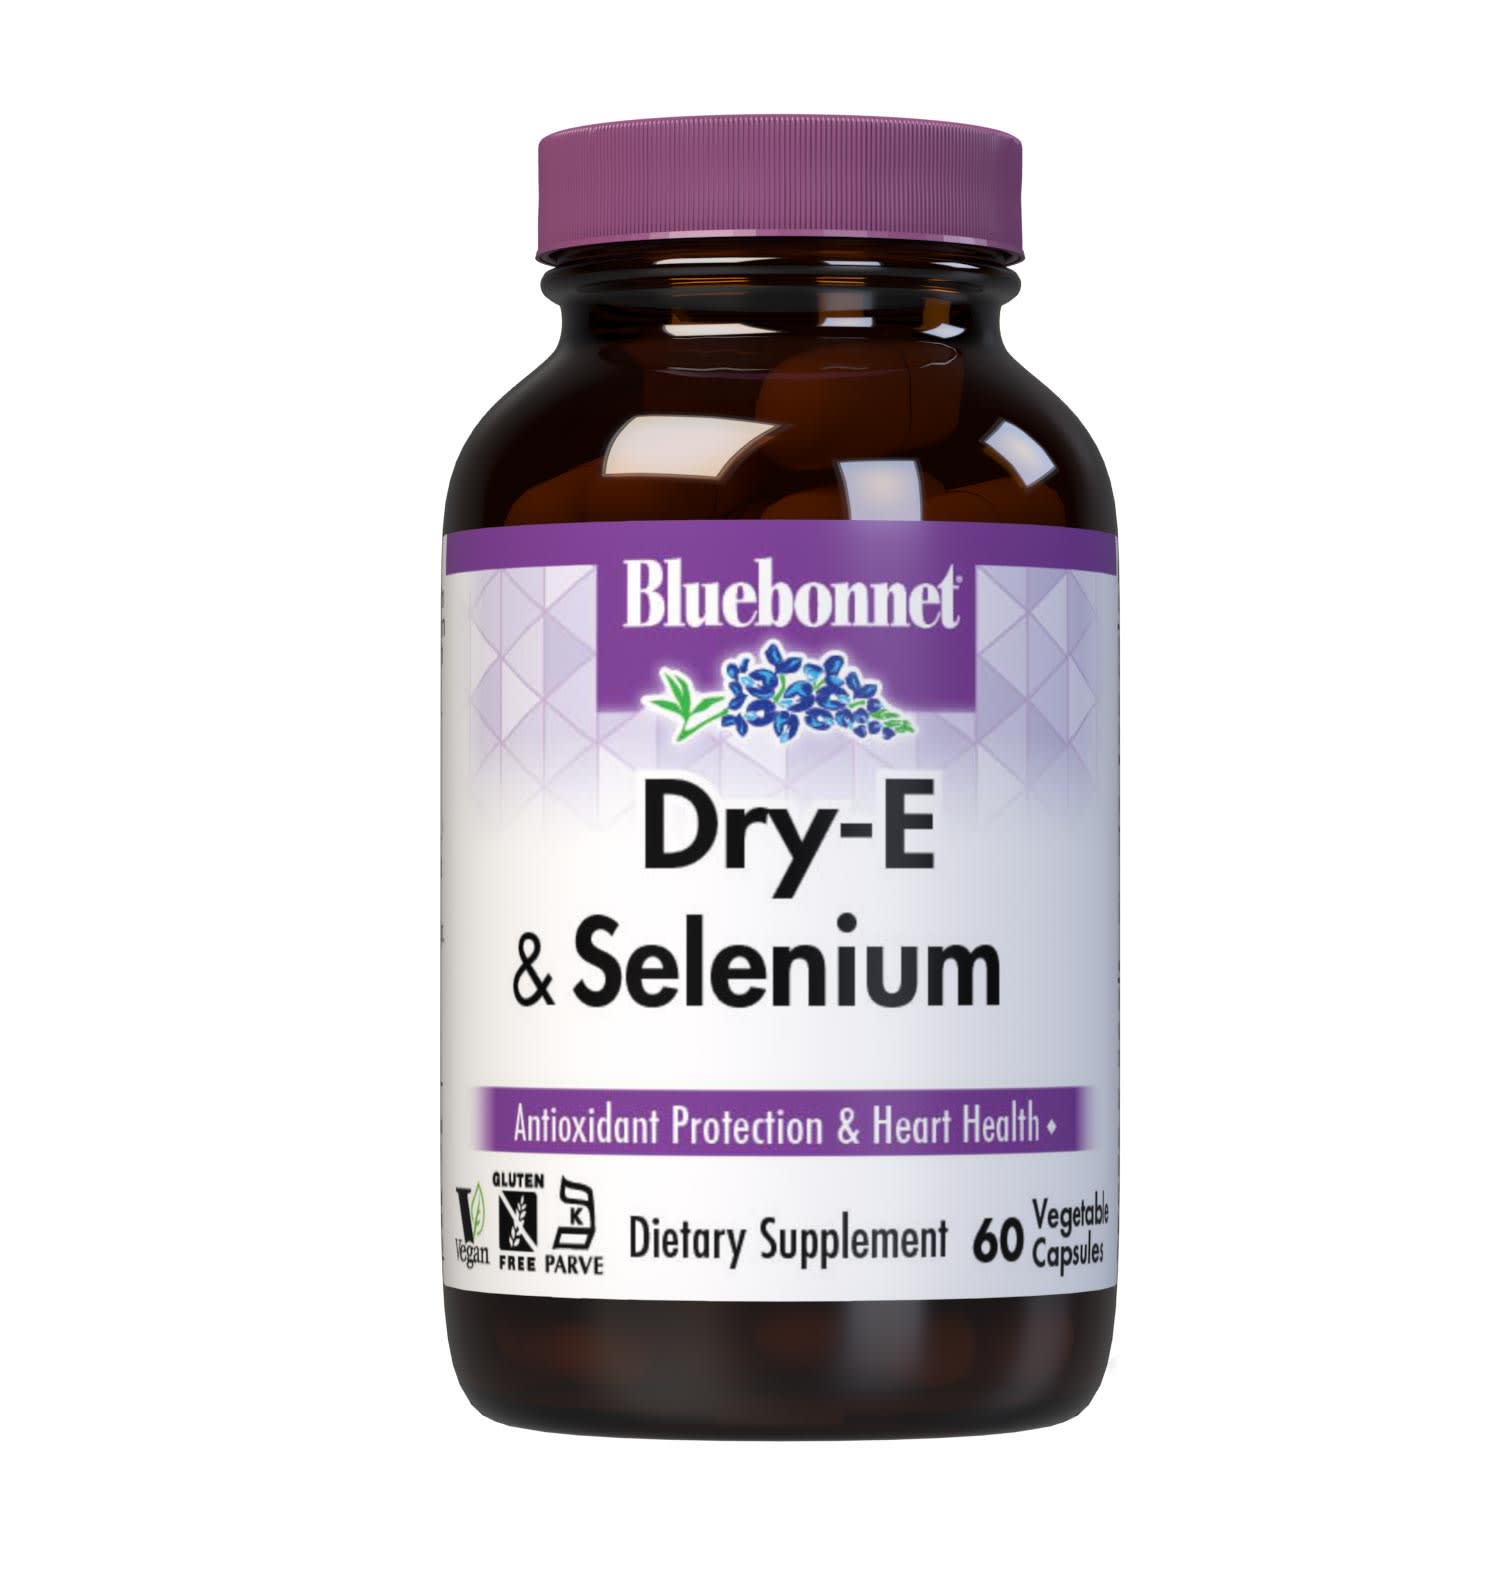 Dry E-268 mg (400 IU) & Selenium 60 Vegetable Capsules are formulated with vitamin E from oil-free d-alpha tocopheryl succinate, and selenium from L-selenomethionine. Vitamin E and selenium both offer free radical protection and cardiovascular support. #size_60 count